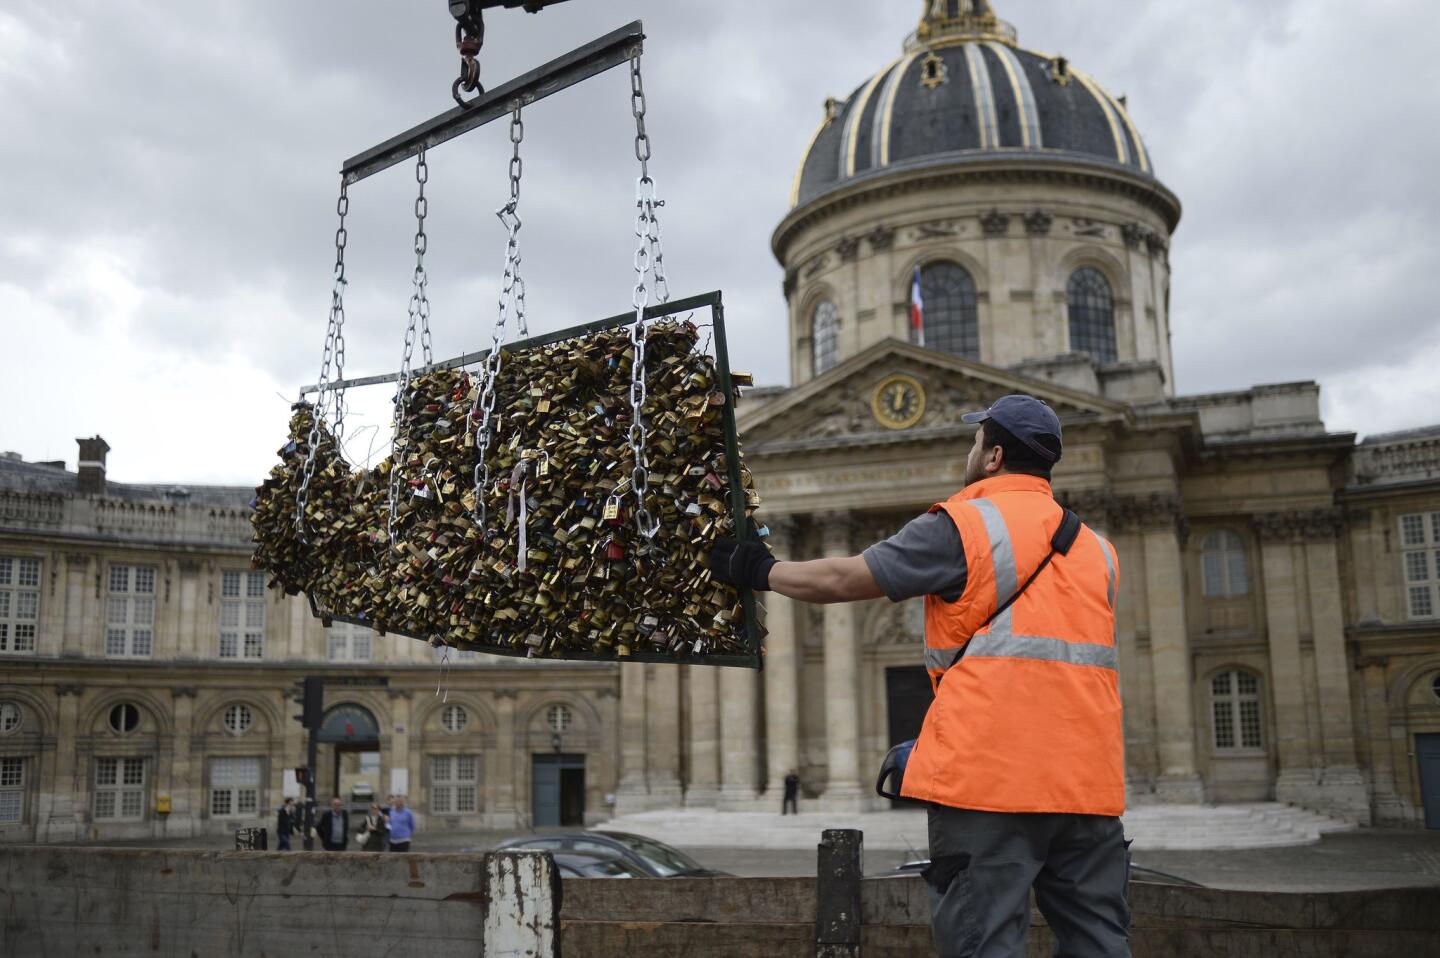 A worker removes padlocks attached to the railings of the Pont des Arts on June 1, 2015, in Paris.